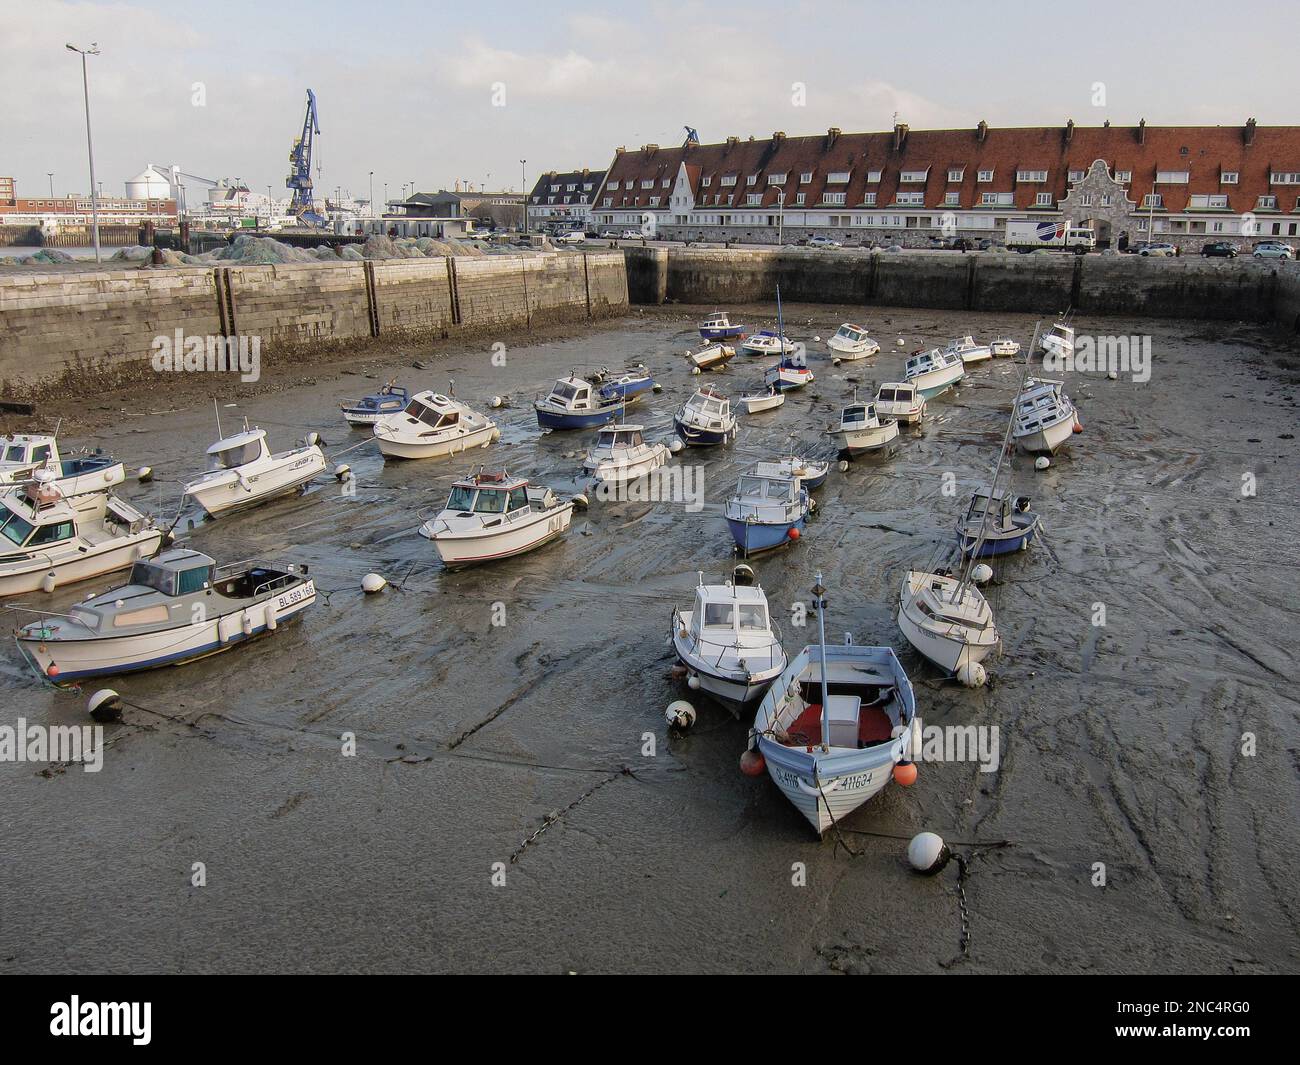 Many boat aground on the shore at low tide in Calais, France. Stock Photo